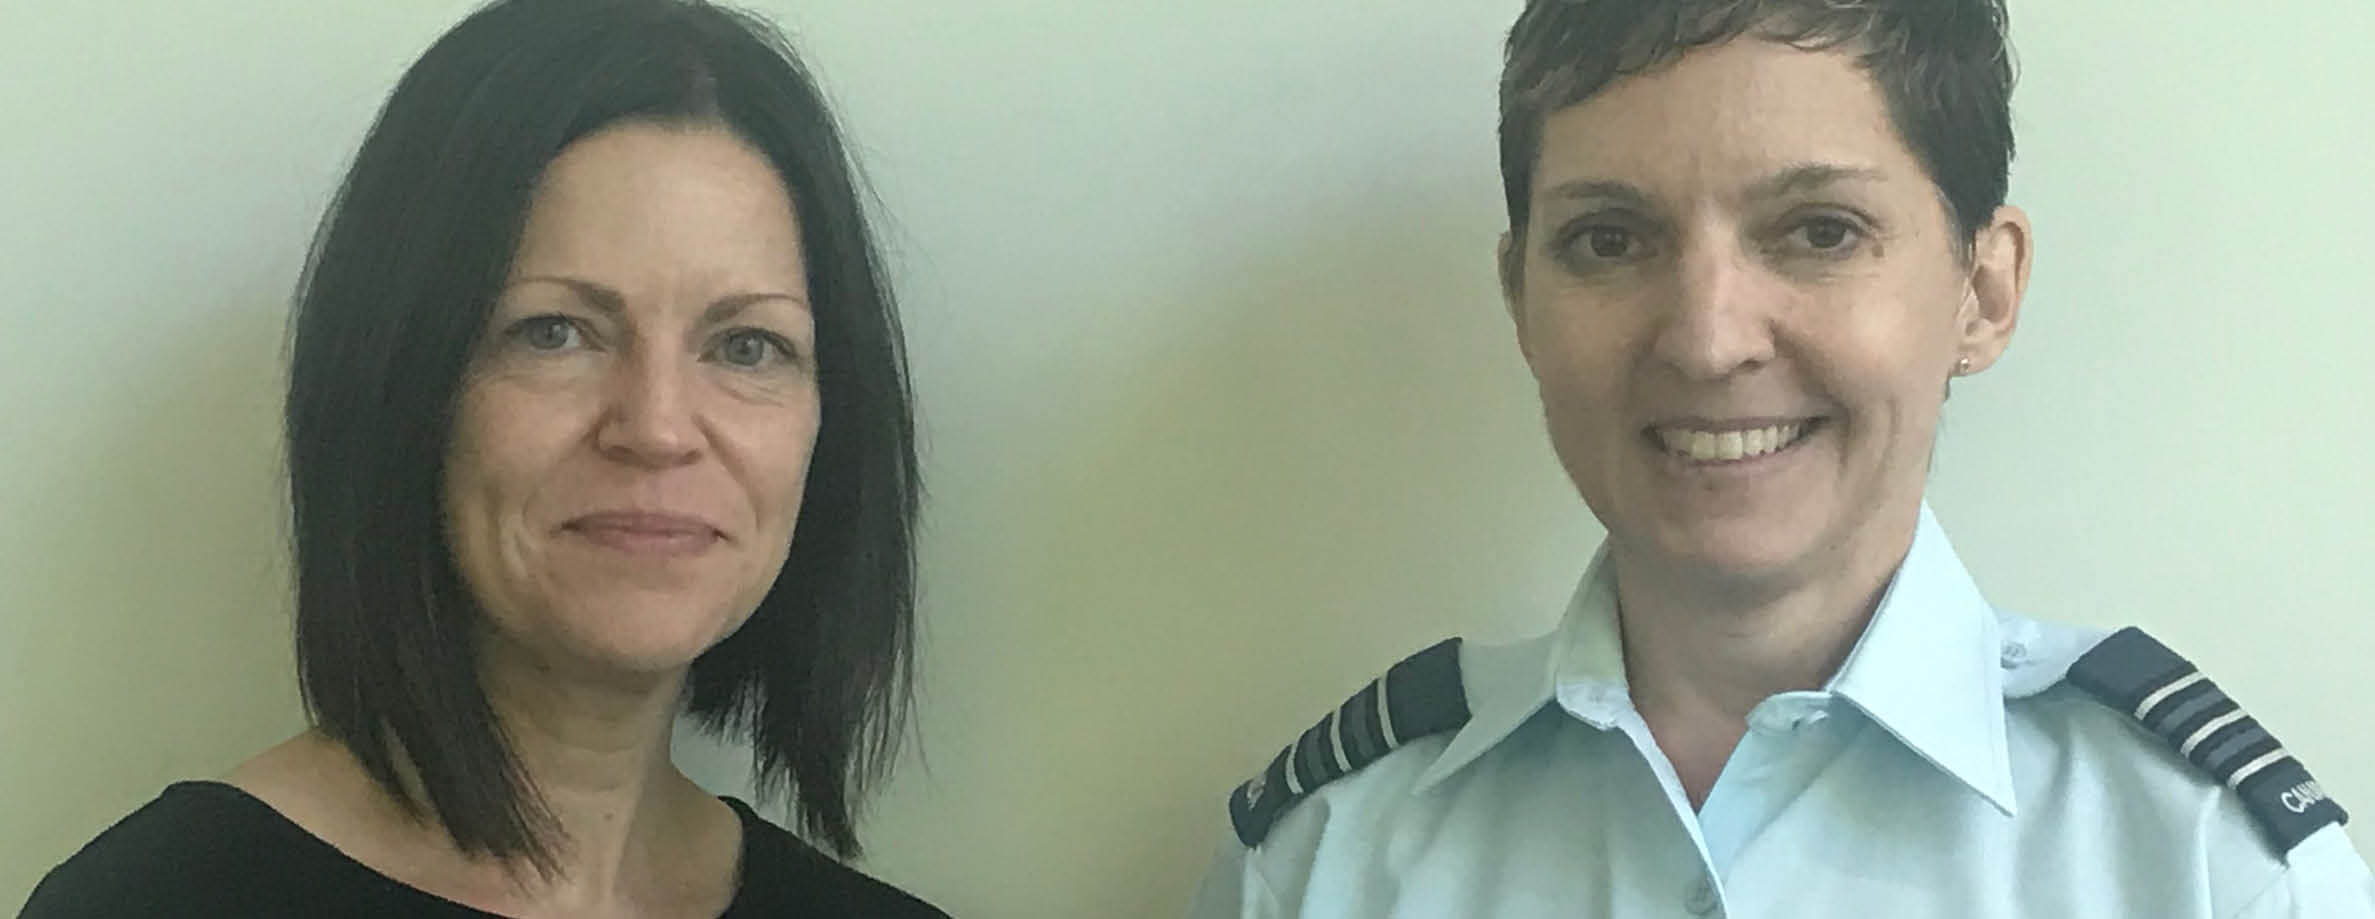 Resilience and Well-Being Q&A with LCol Suzanne Bailey and Marie-Lucie Bédard of the Canadian Armed Forces